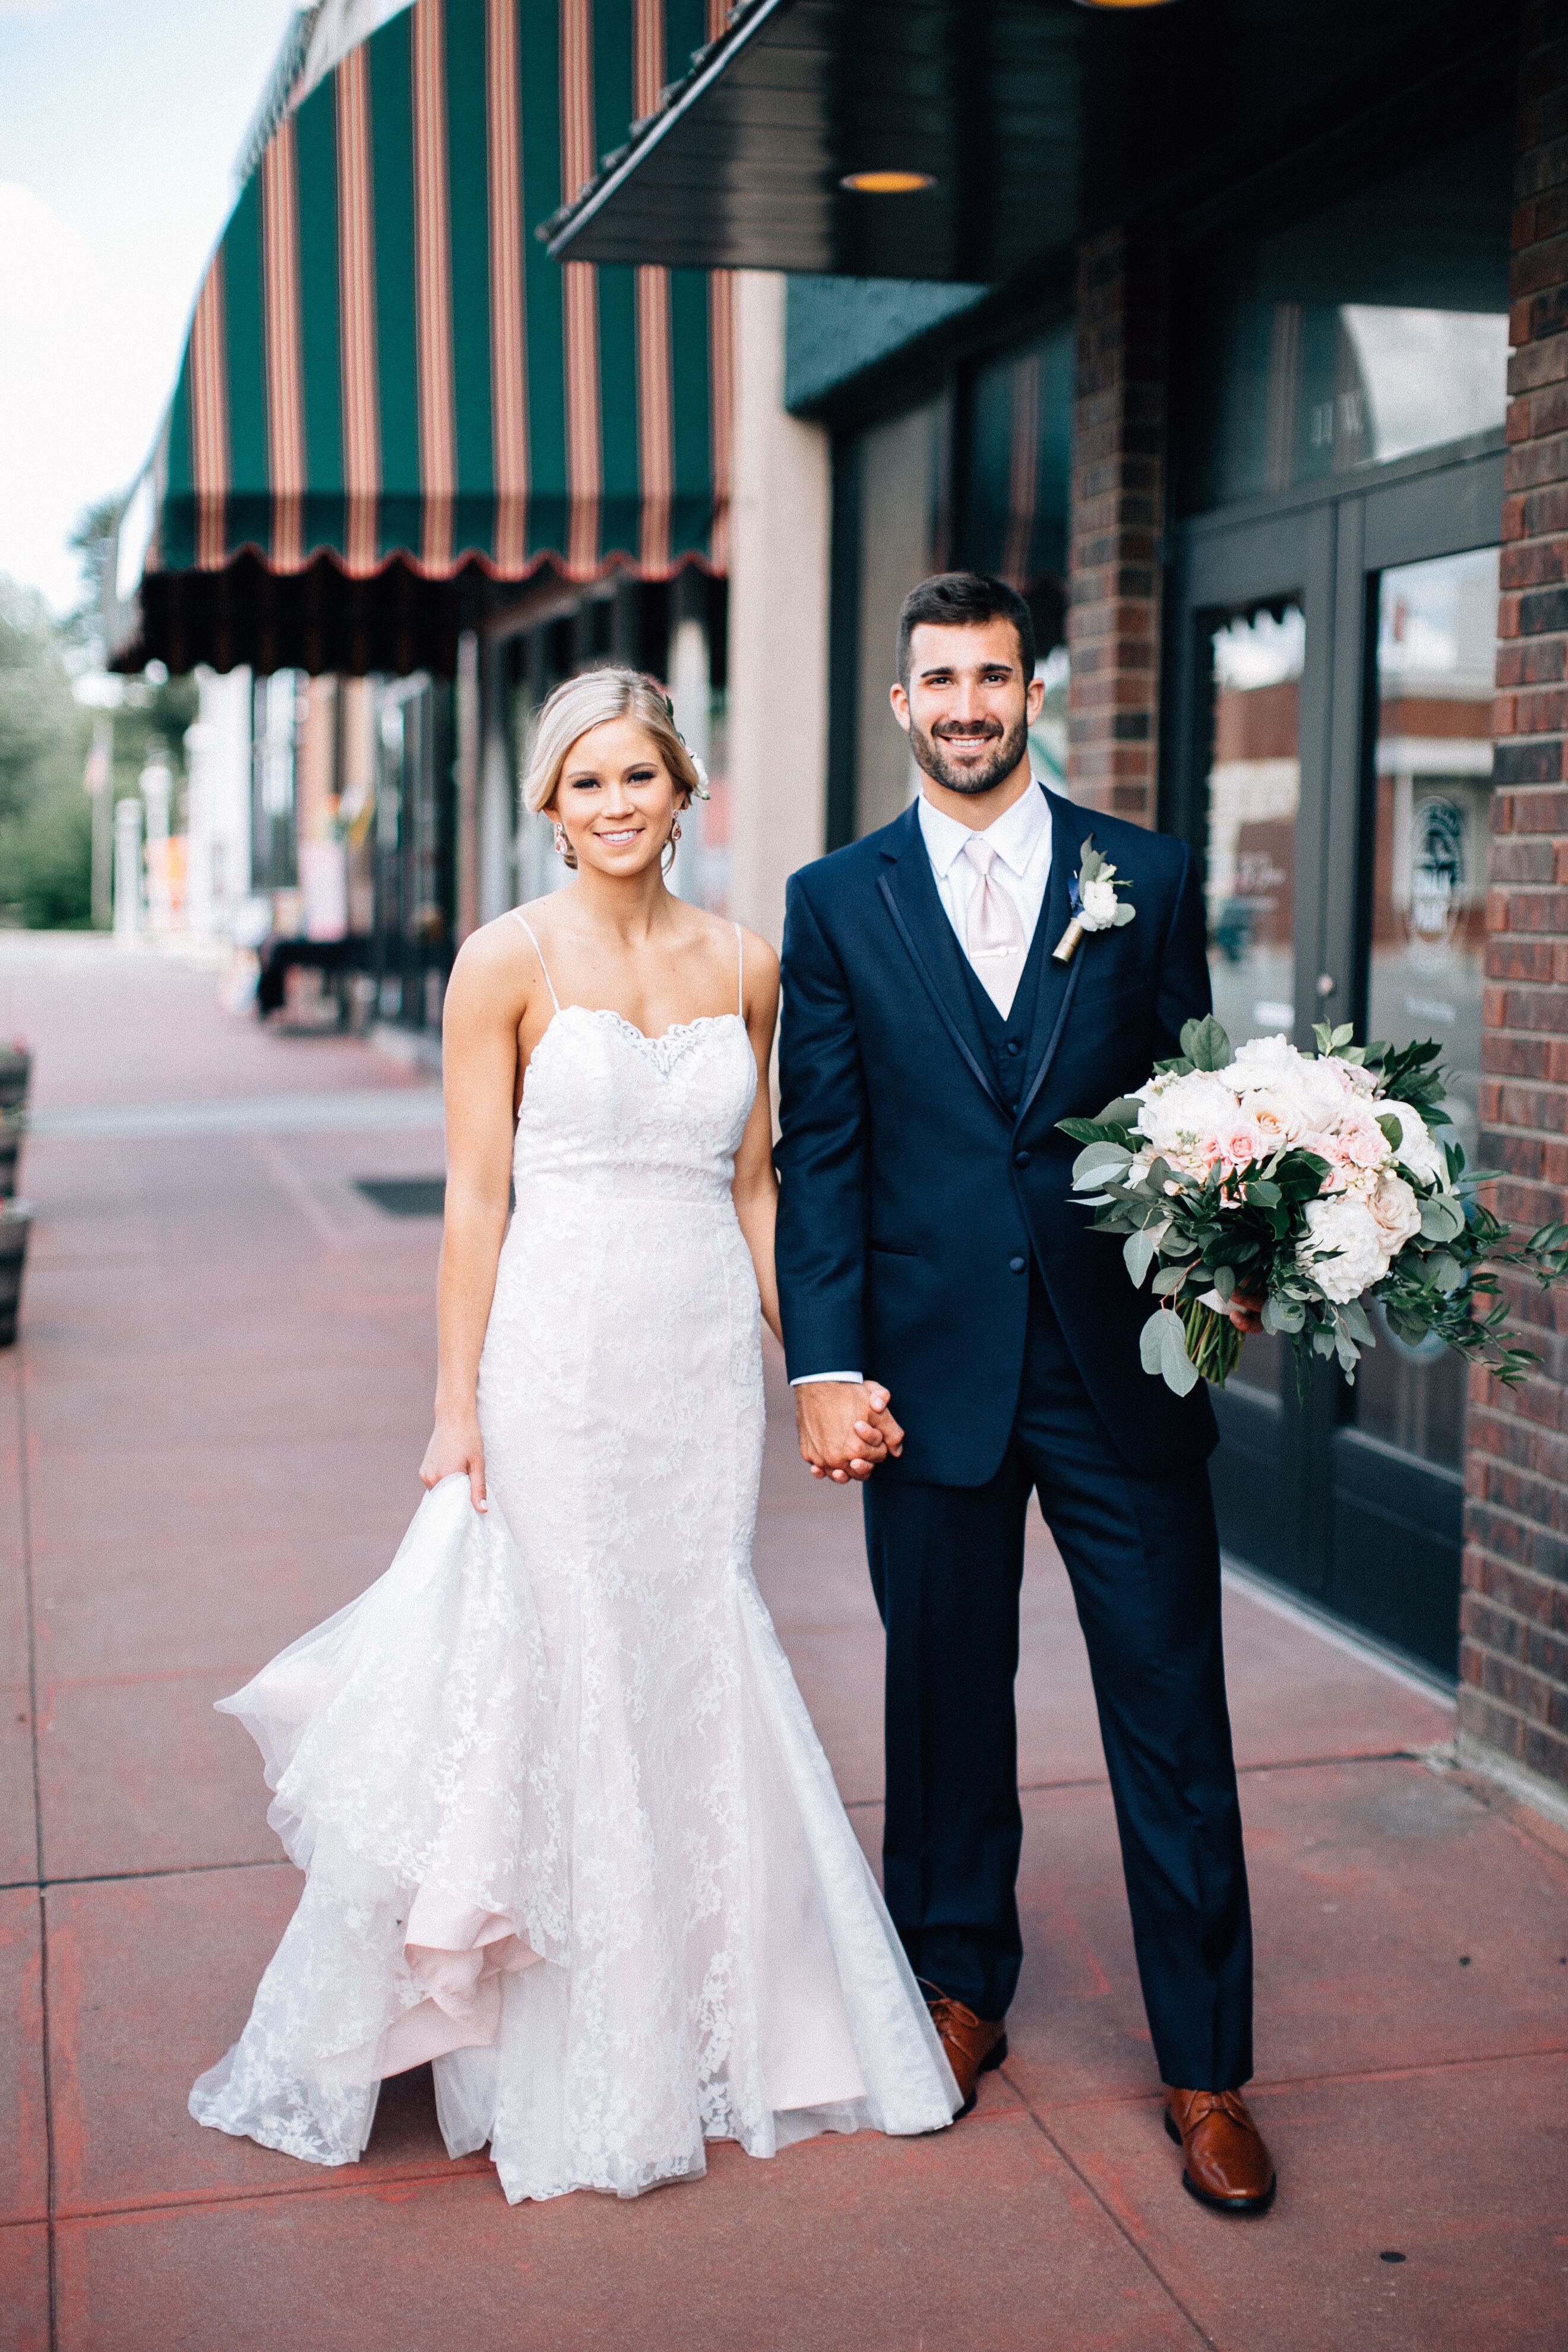 A Romantic Country Wedding at Town Square in Paola, Kansas